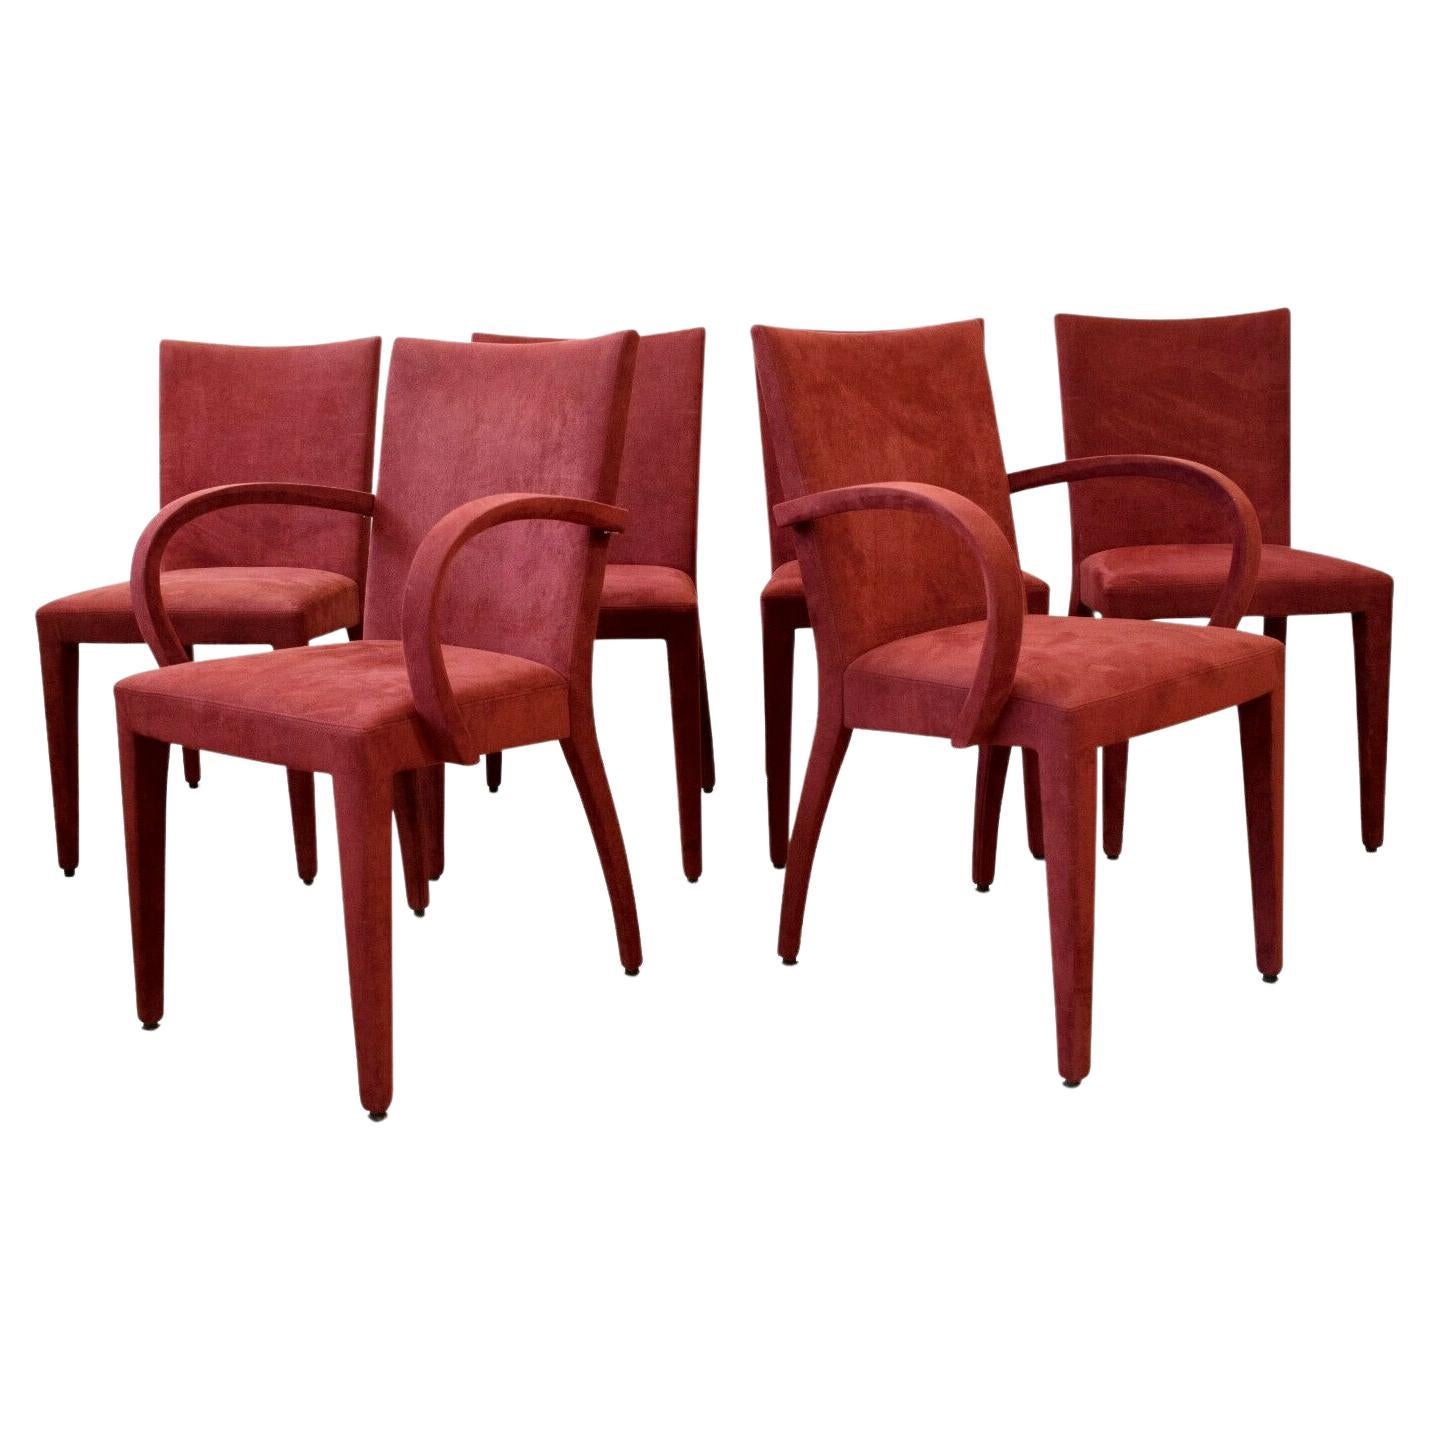 Roche Bobois Red Suede Dining Chairs, Set of 6 